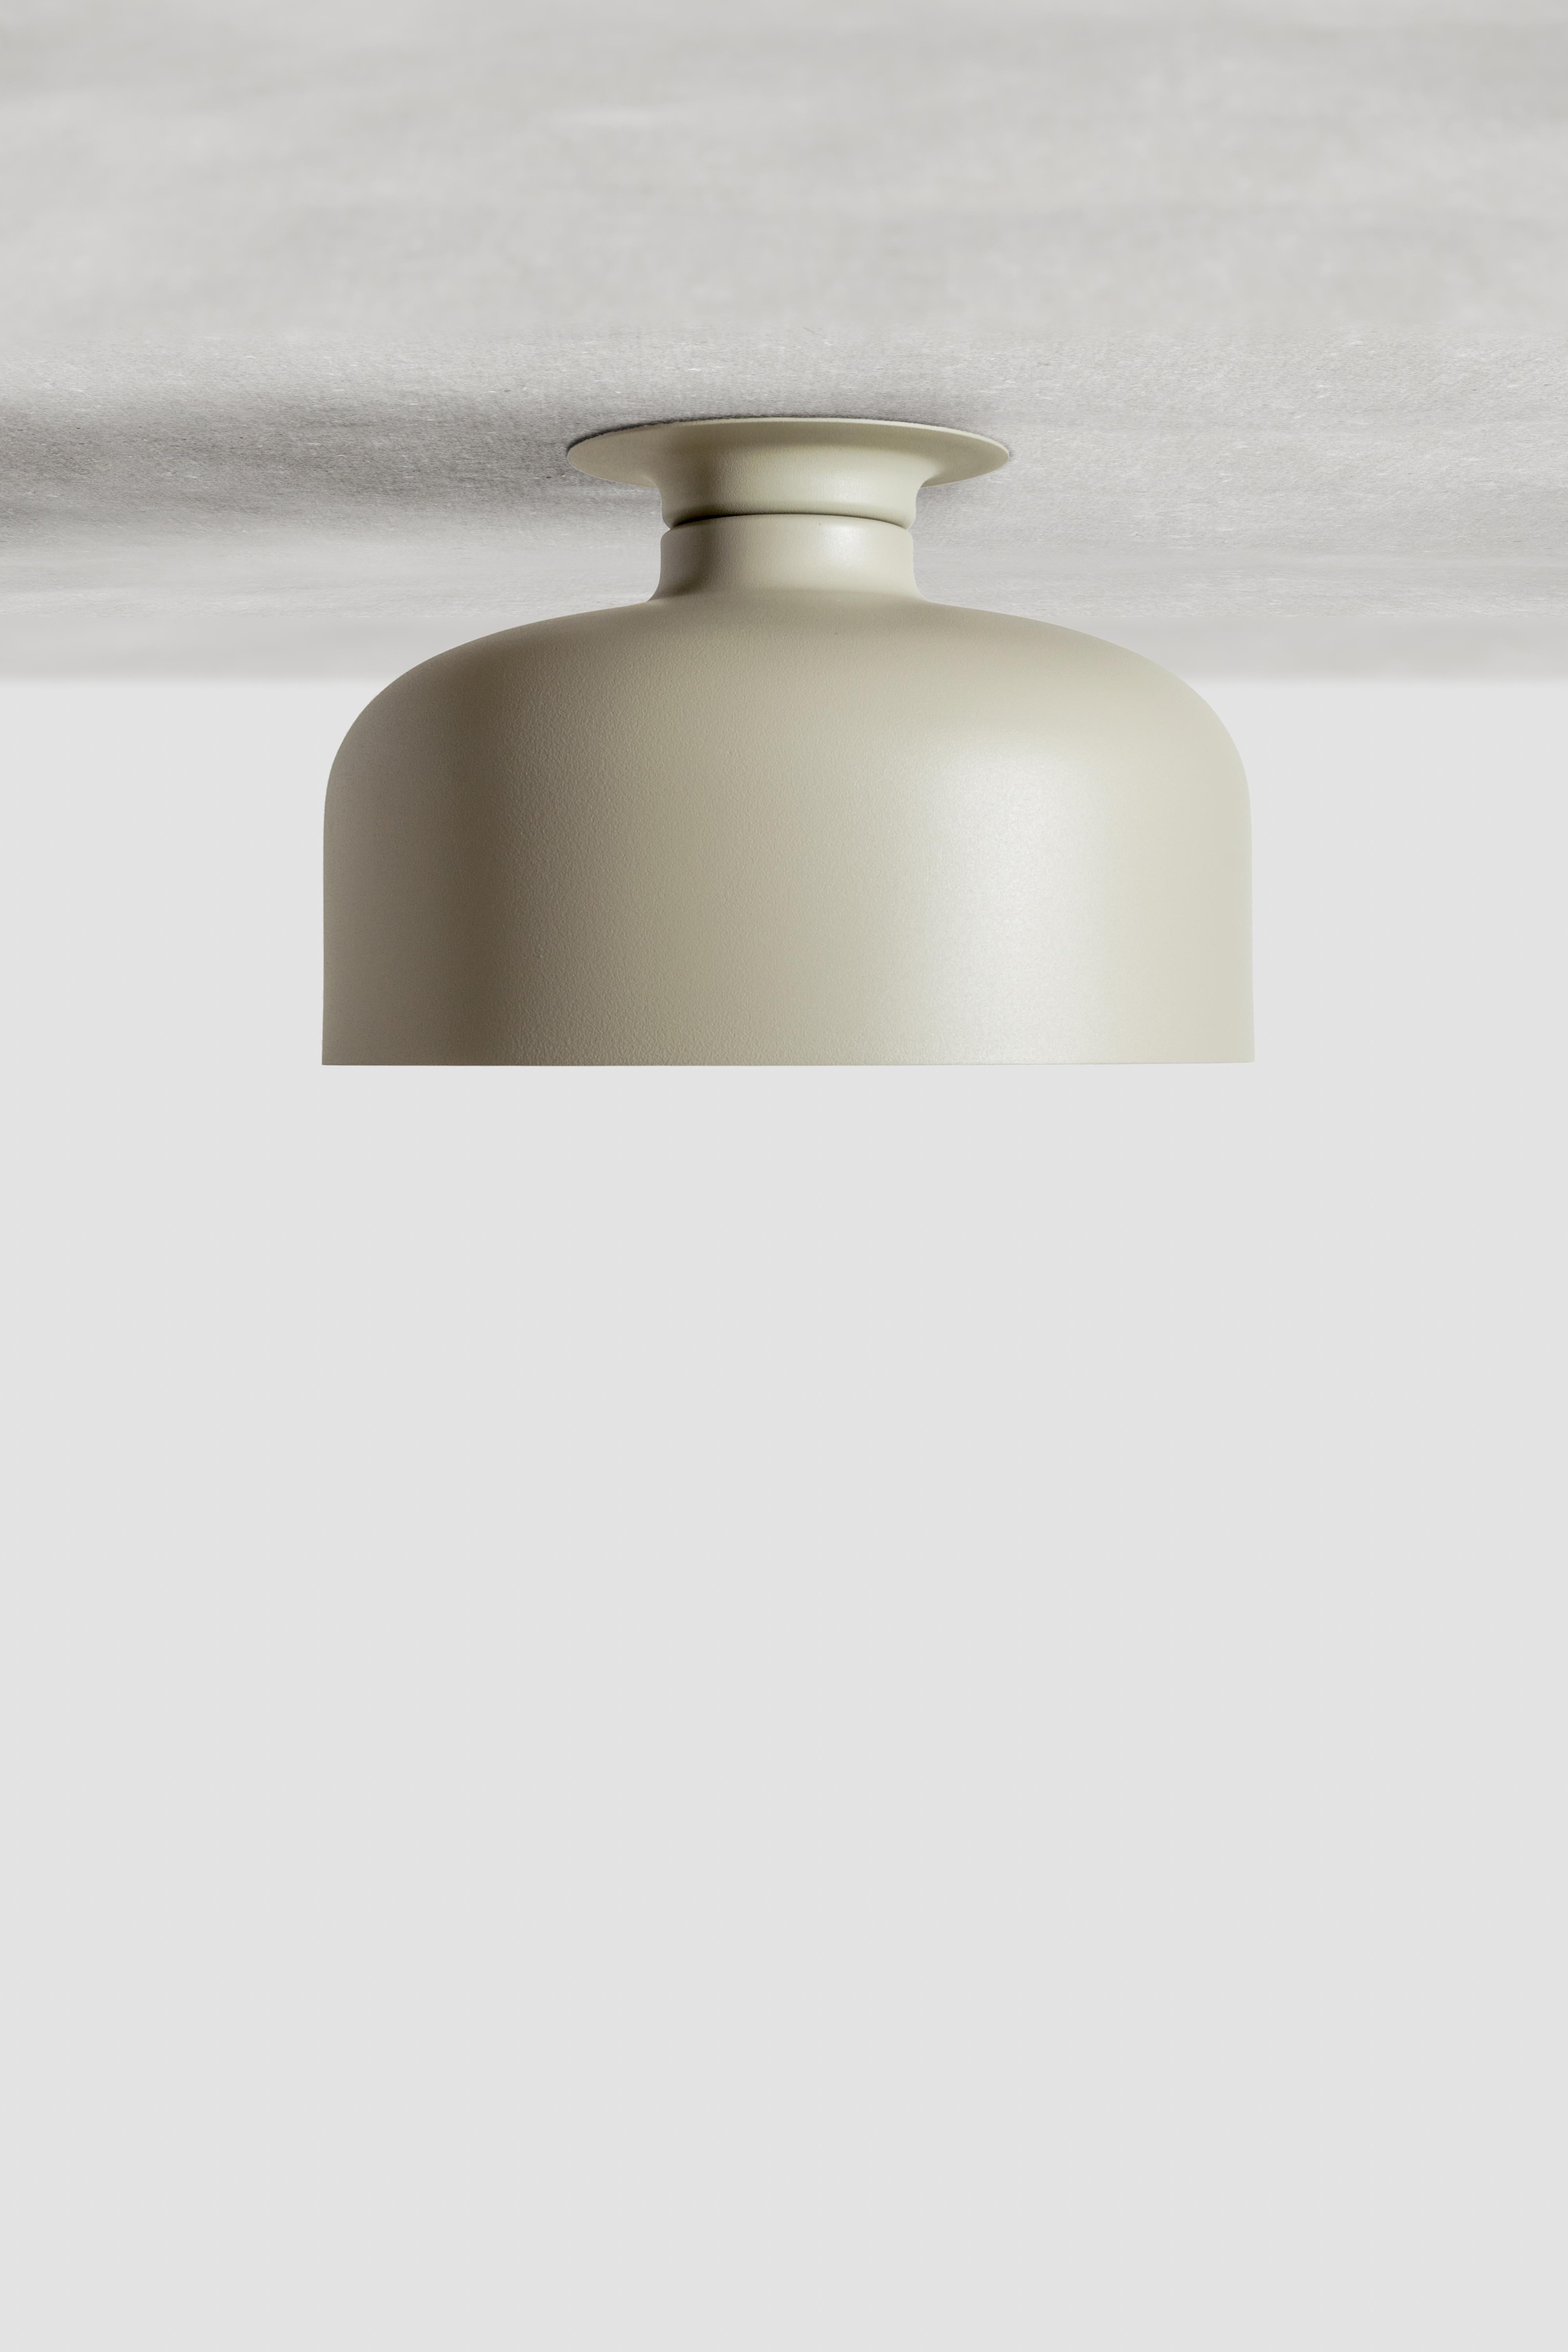 SPOTLIGHT VOLUMES, ceiling lamp / wall lamp
Design: Lukas Peet, Editor: ANDLight
UL Listed

Model shown: A

Inspired by spotlights, the Spotlight Volumes series is based on four unique shade profiles which combine in various ways. While designed